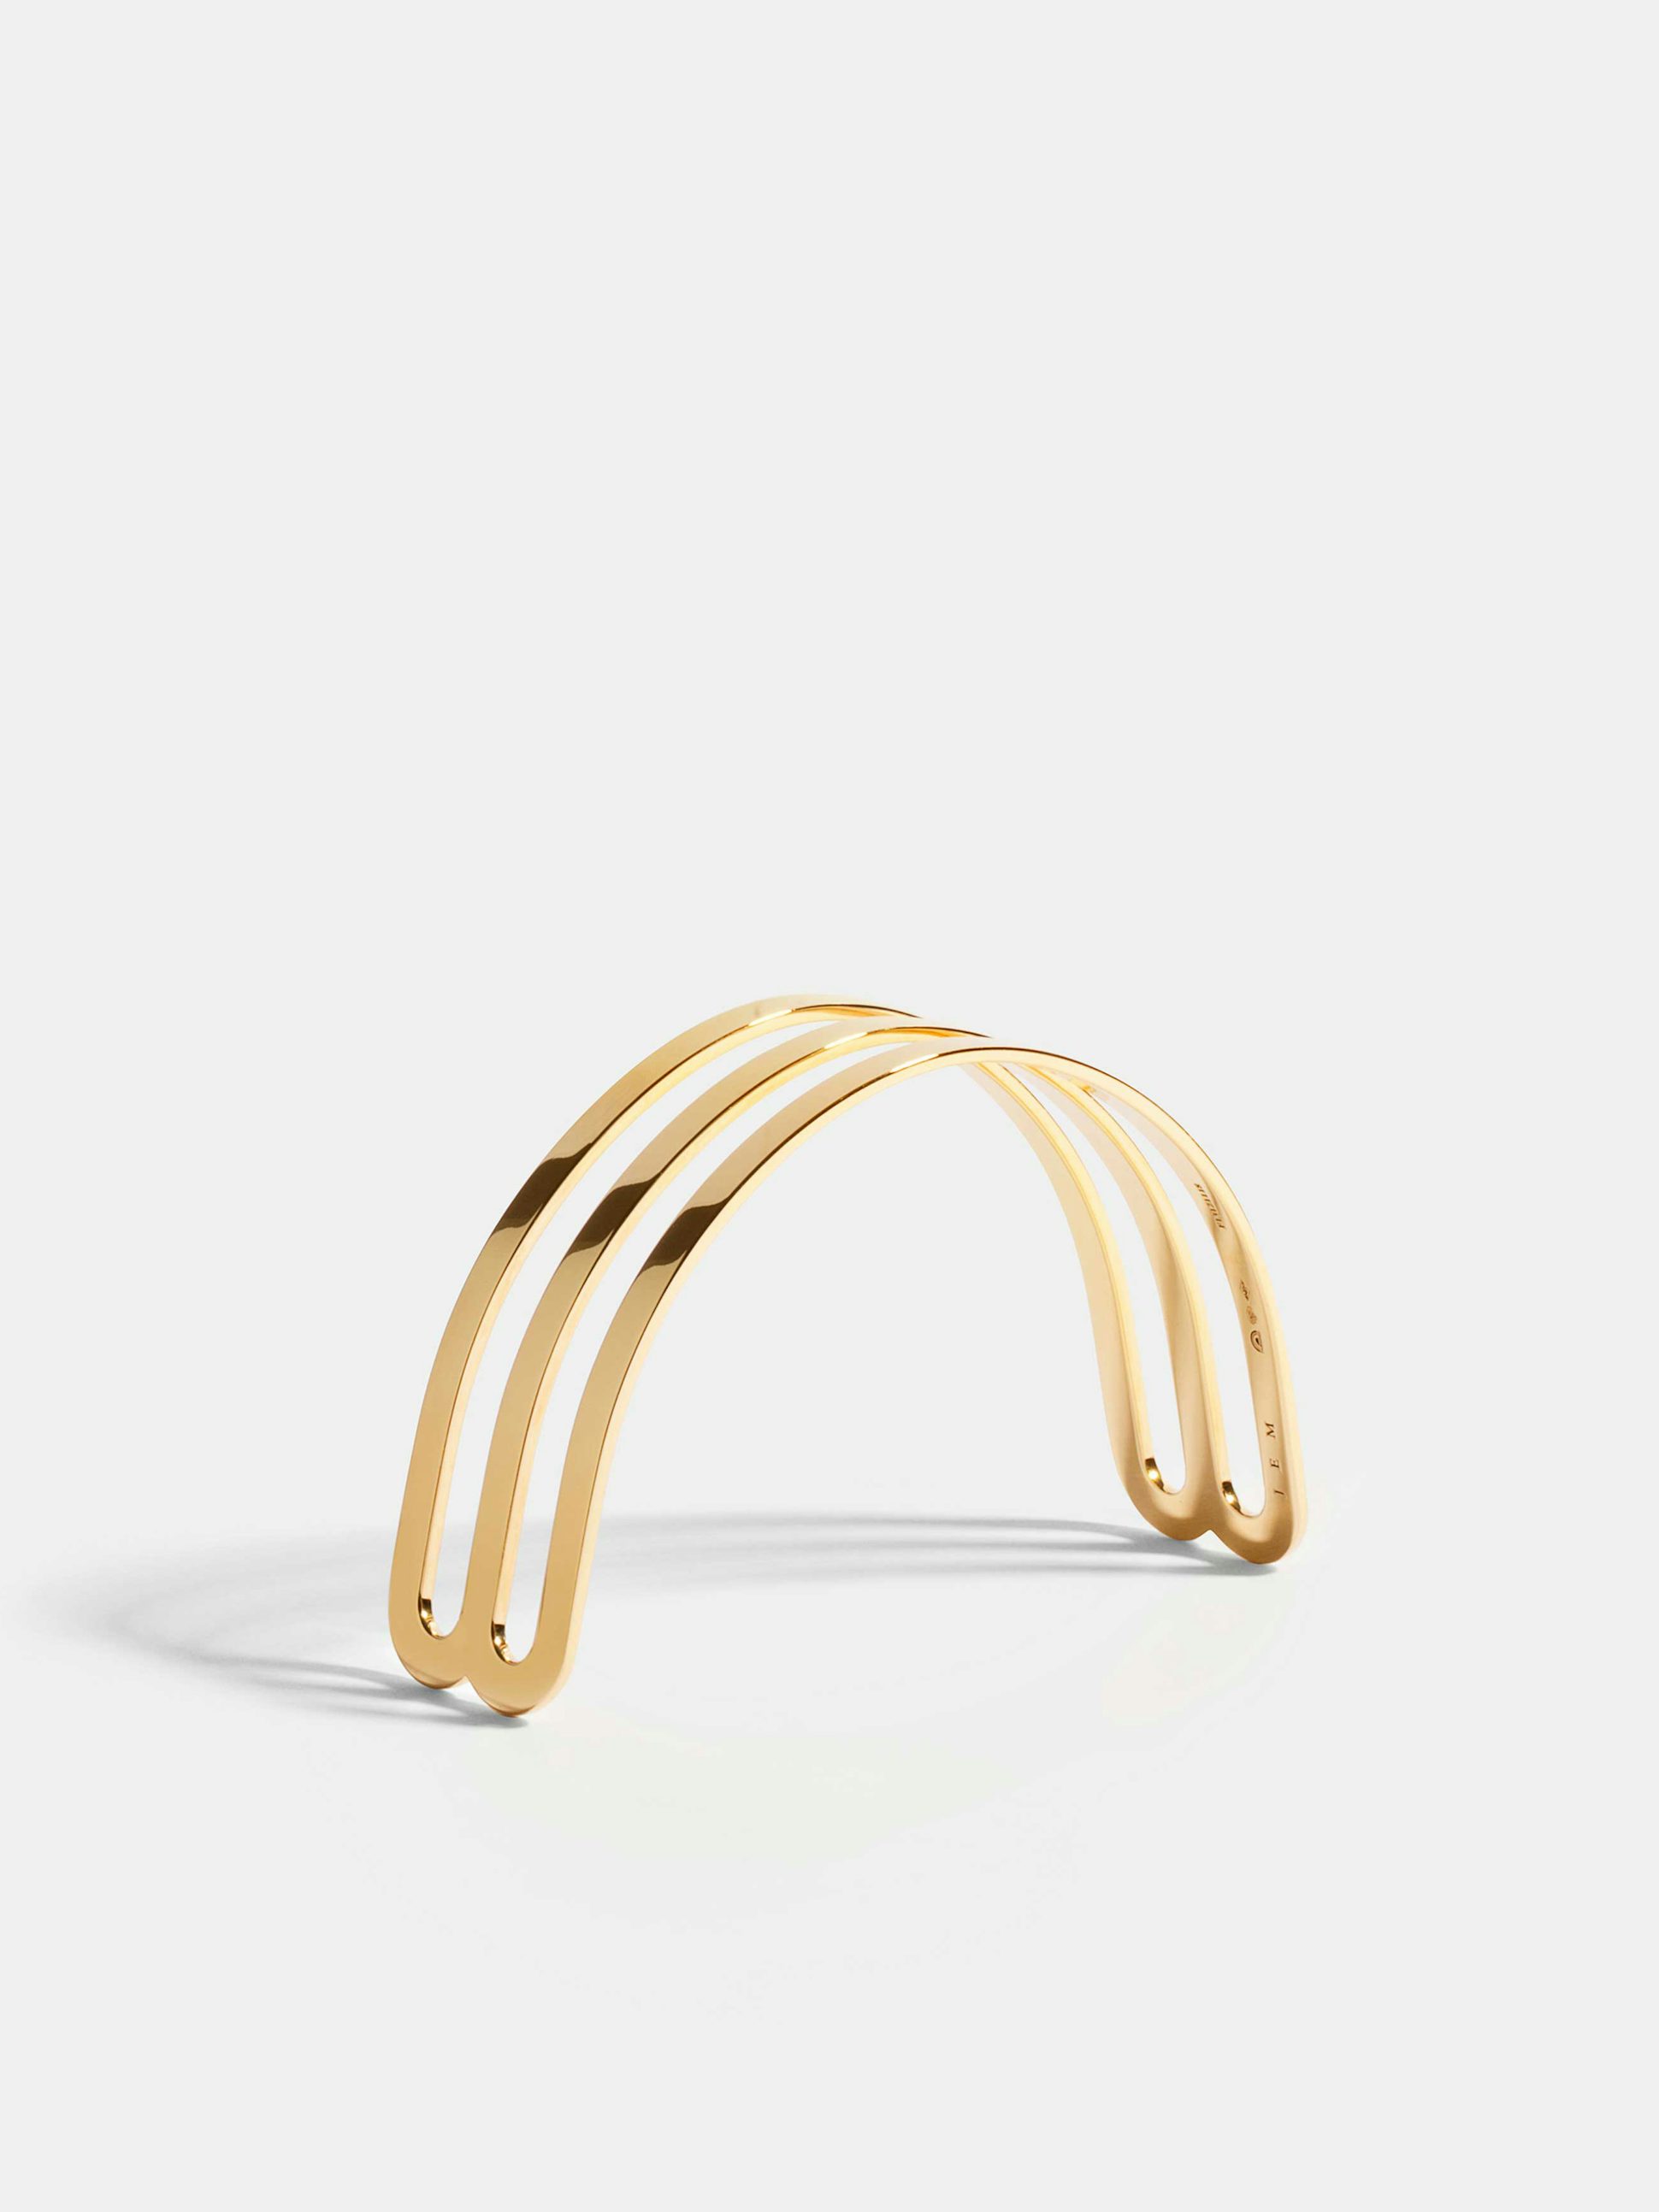 Étreintes double half-bracelet in 18k Fairmined ethical yellow gold with a polished finish.